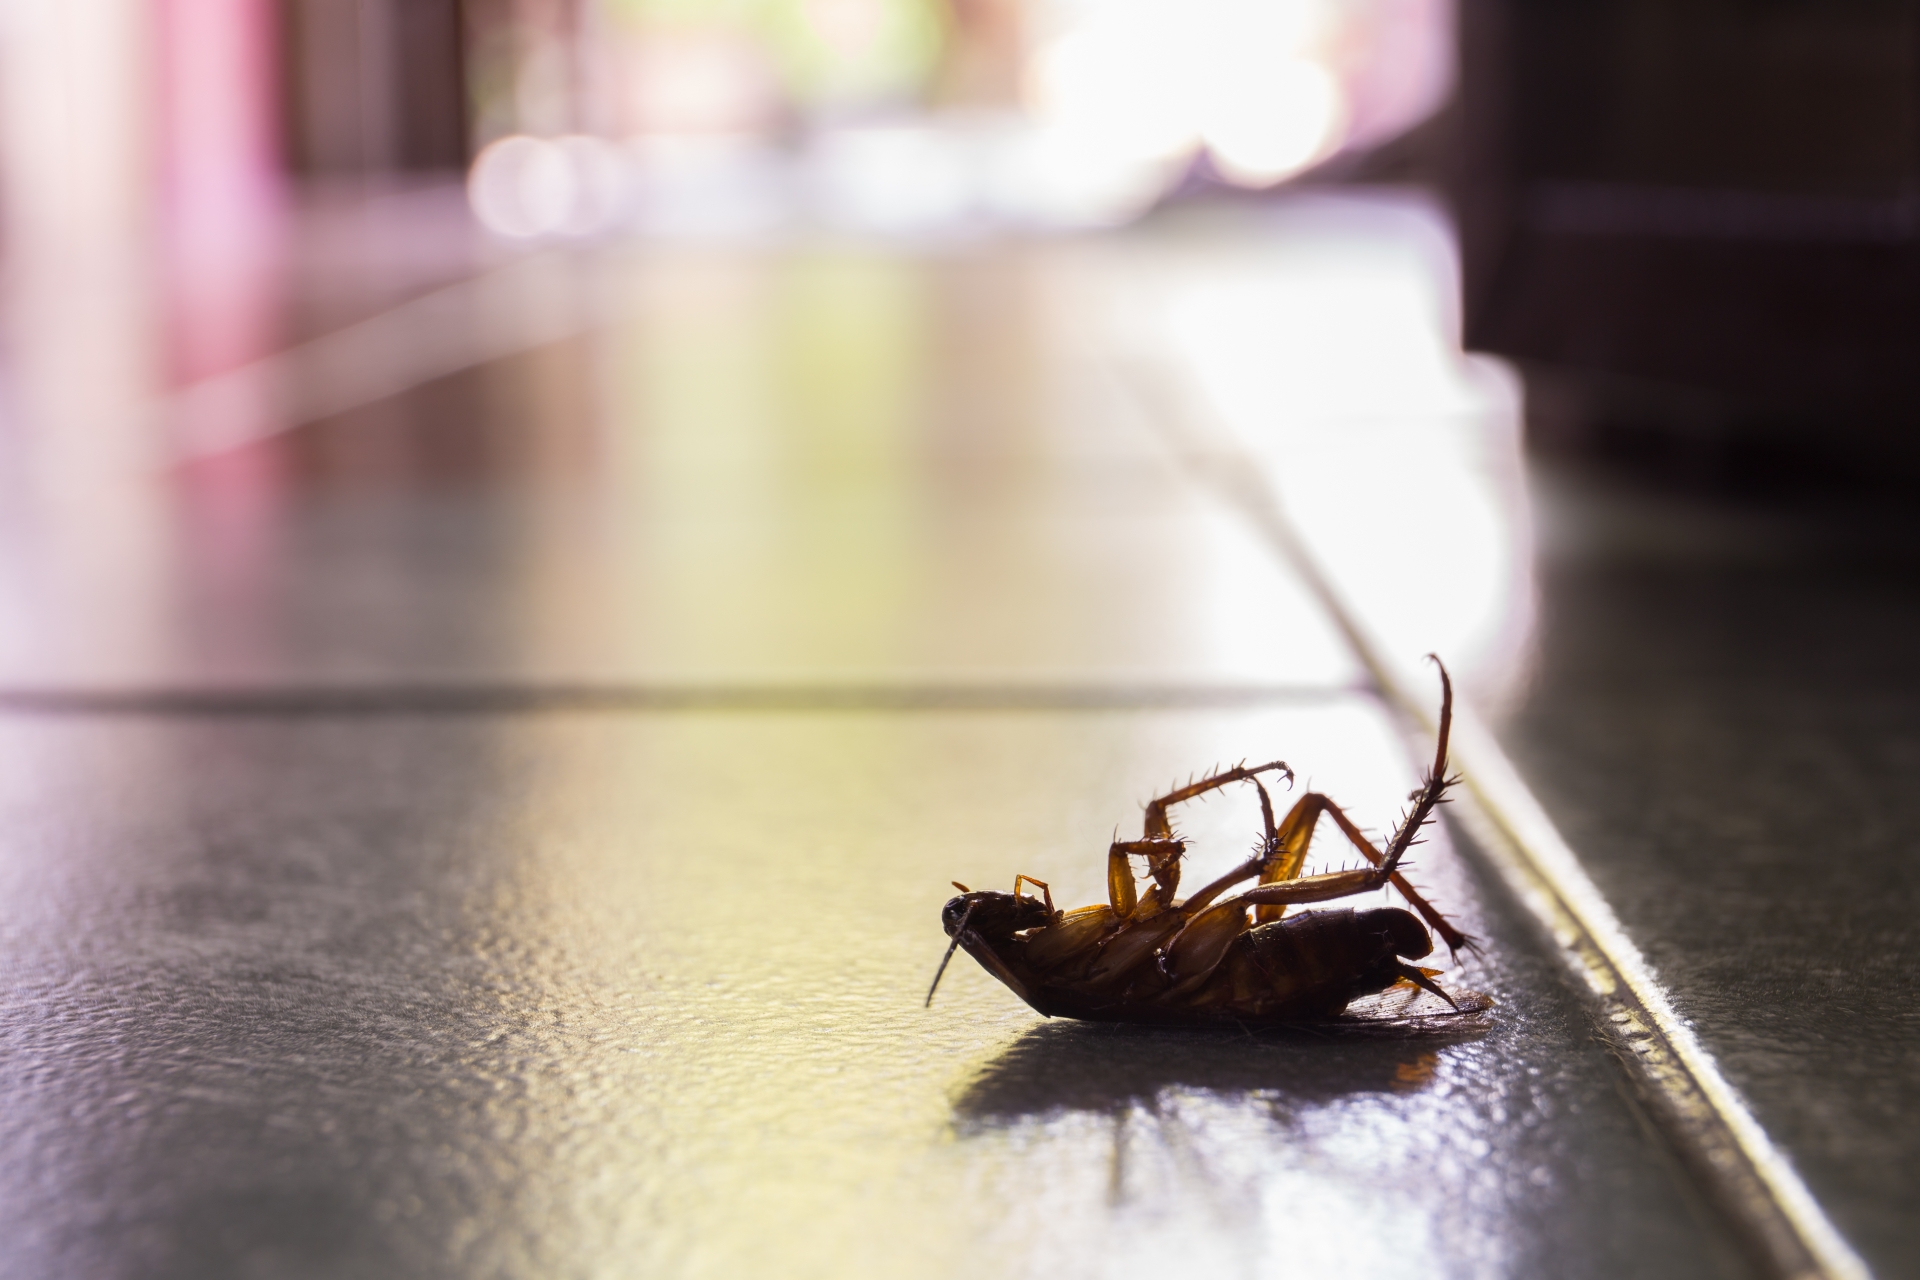 Cockroach Control, Pest Control in Catford, Hither Green, SE6. Call Now 020 8166 9746